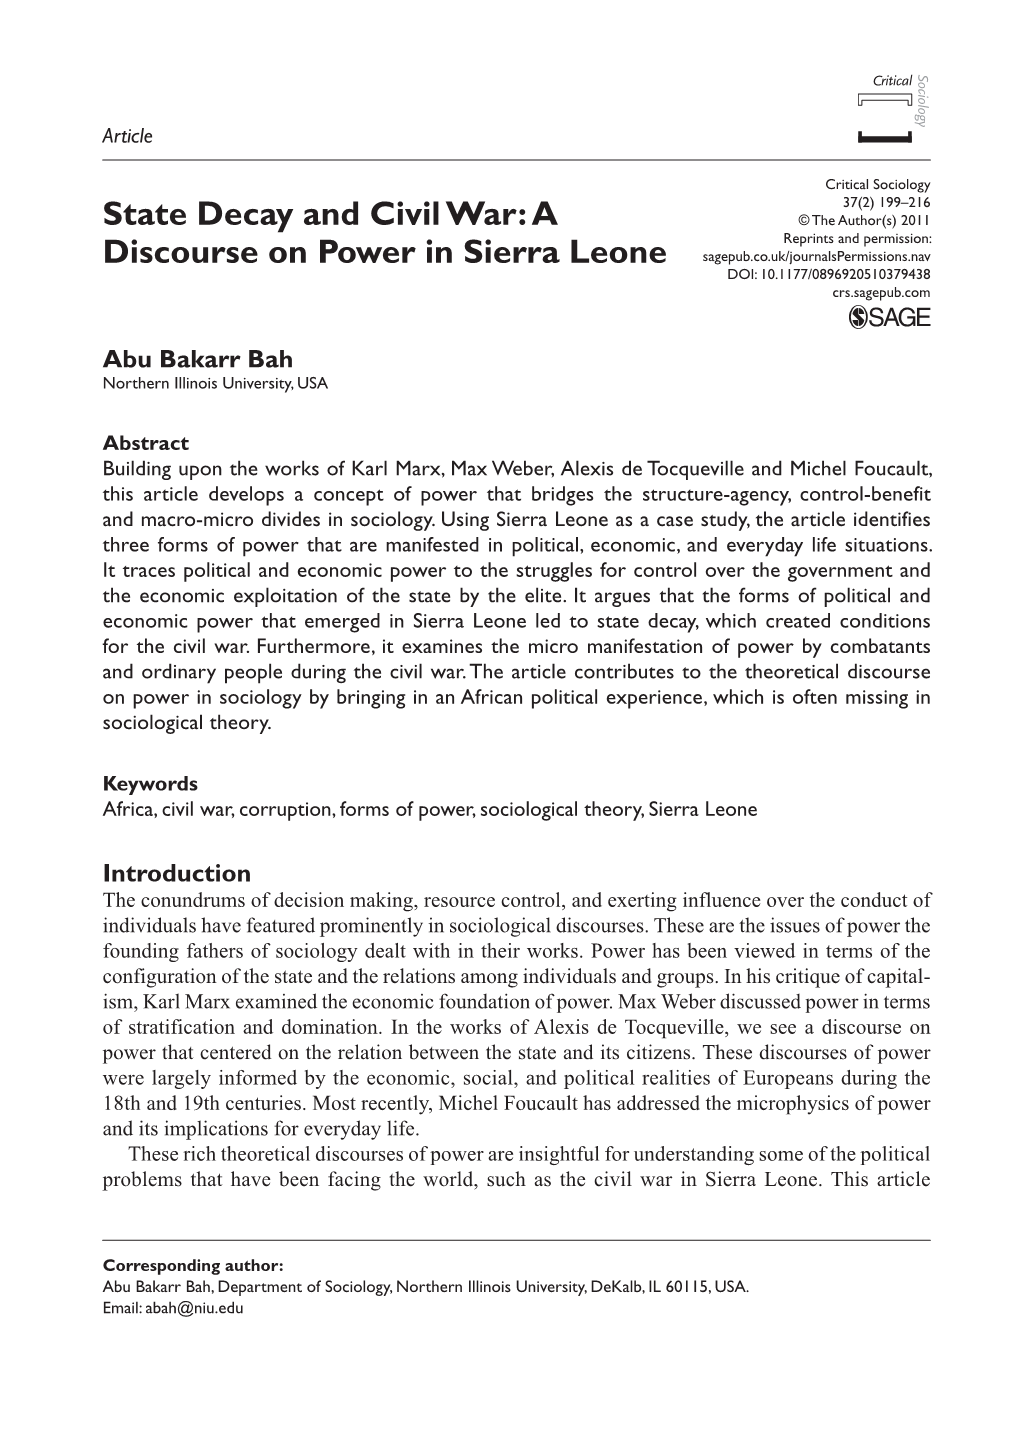 State Decay and Civil War: a Discourse on Power in Sierra Leone